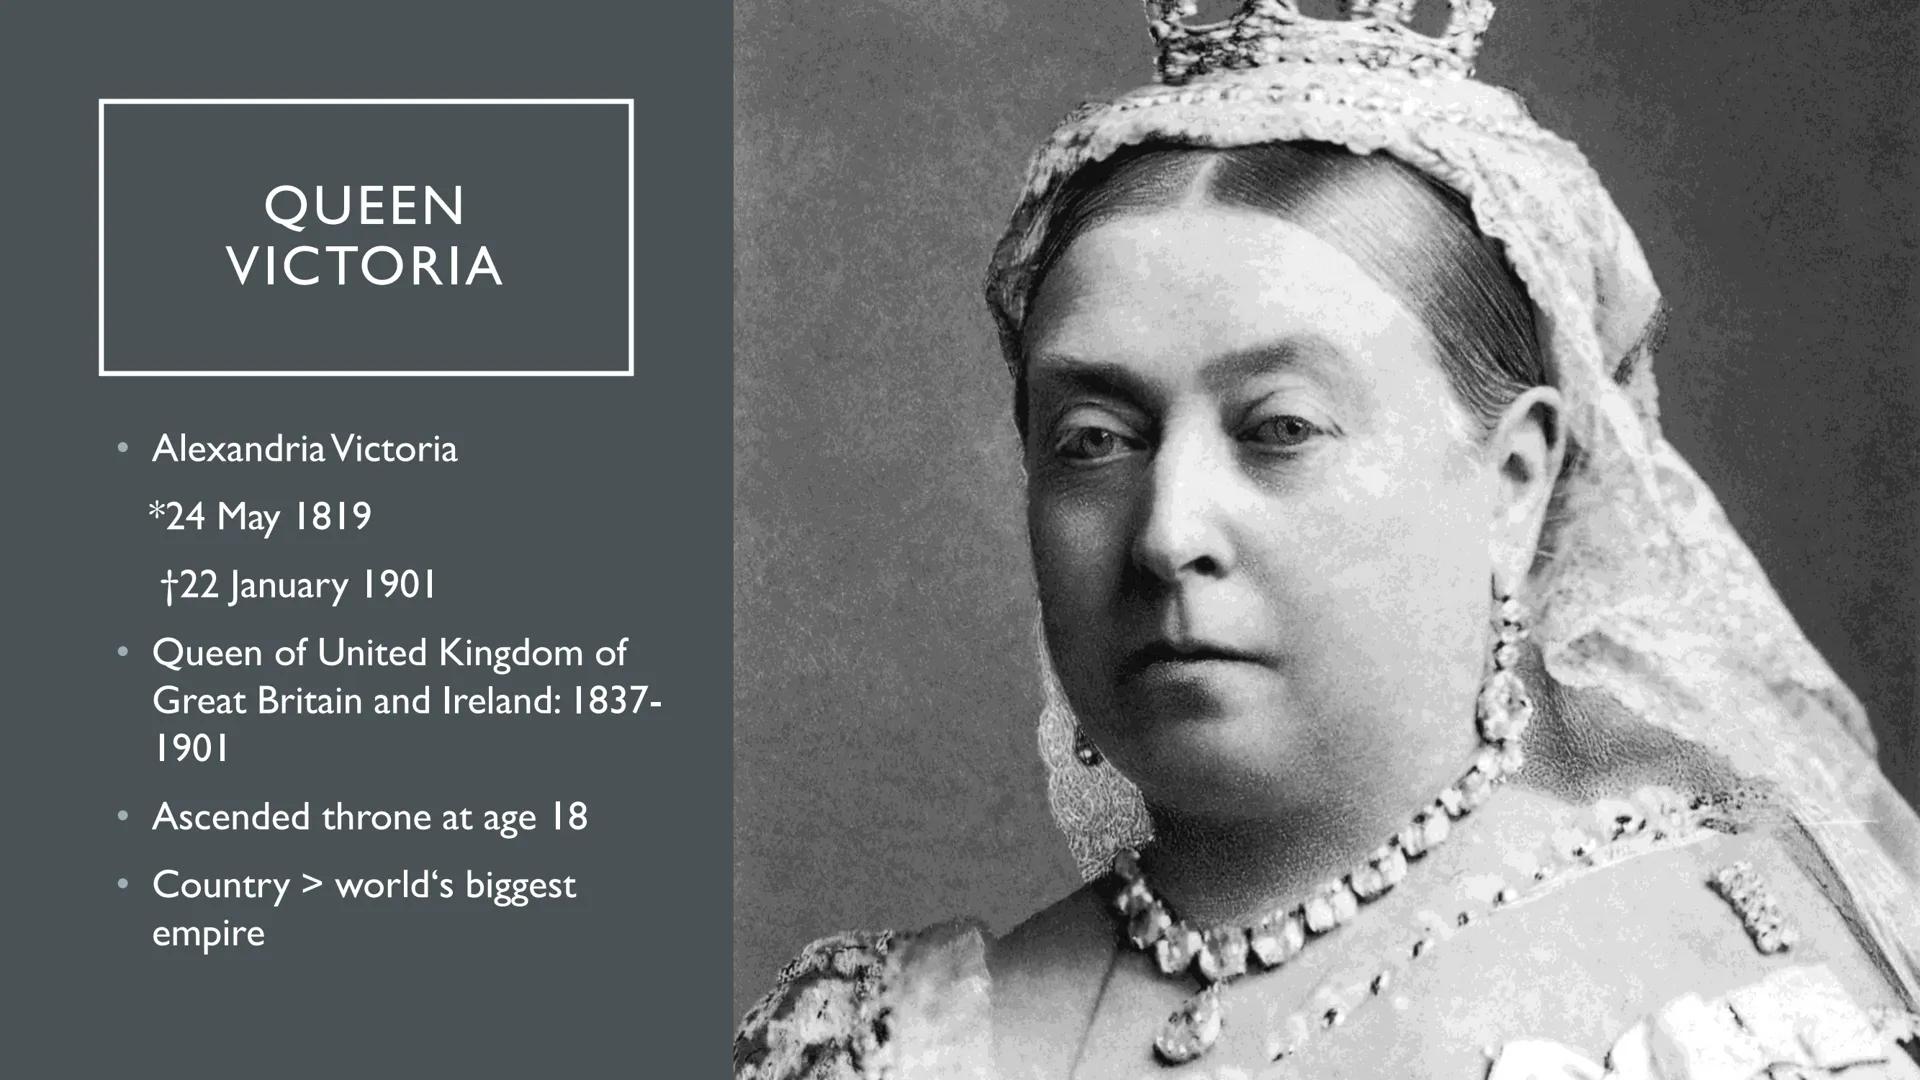 VICTORIAN BRITAIN OVERVIEW
70
TADID
Queen Victoria
Victorian Era
●
●
Society
Religion and Science
Politics
The Industrial Revolution
●
What 